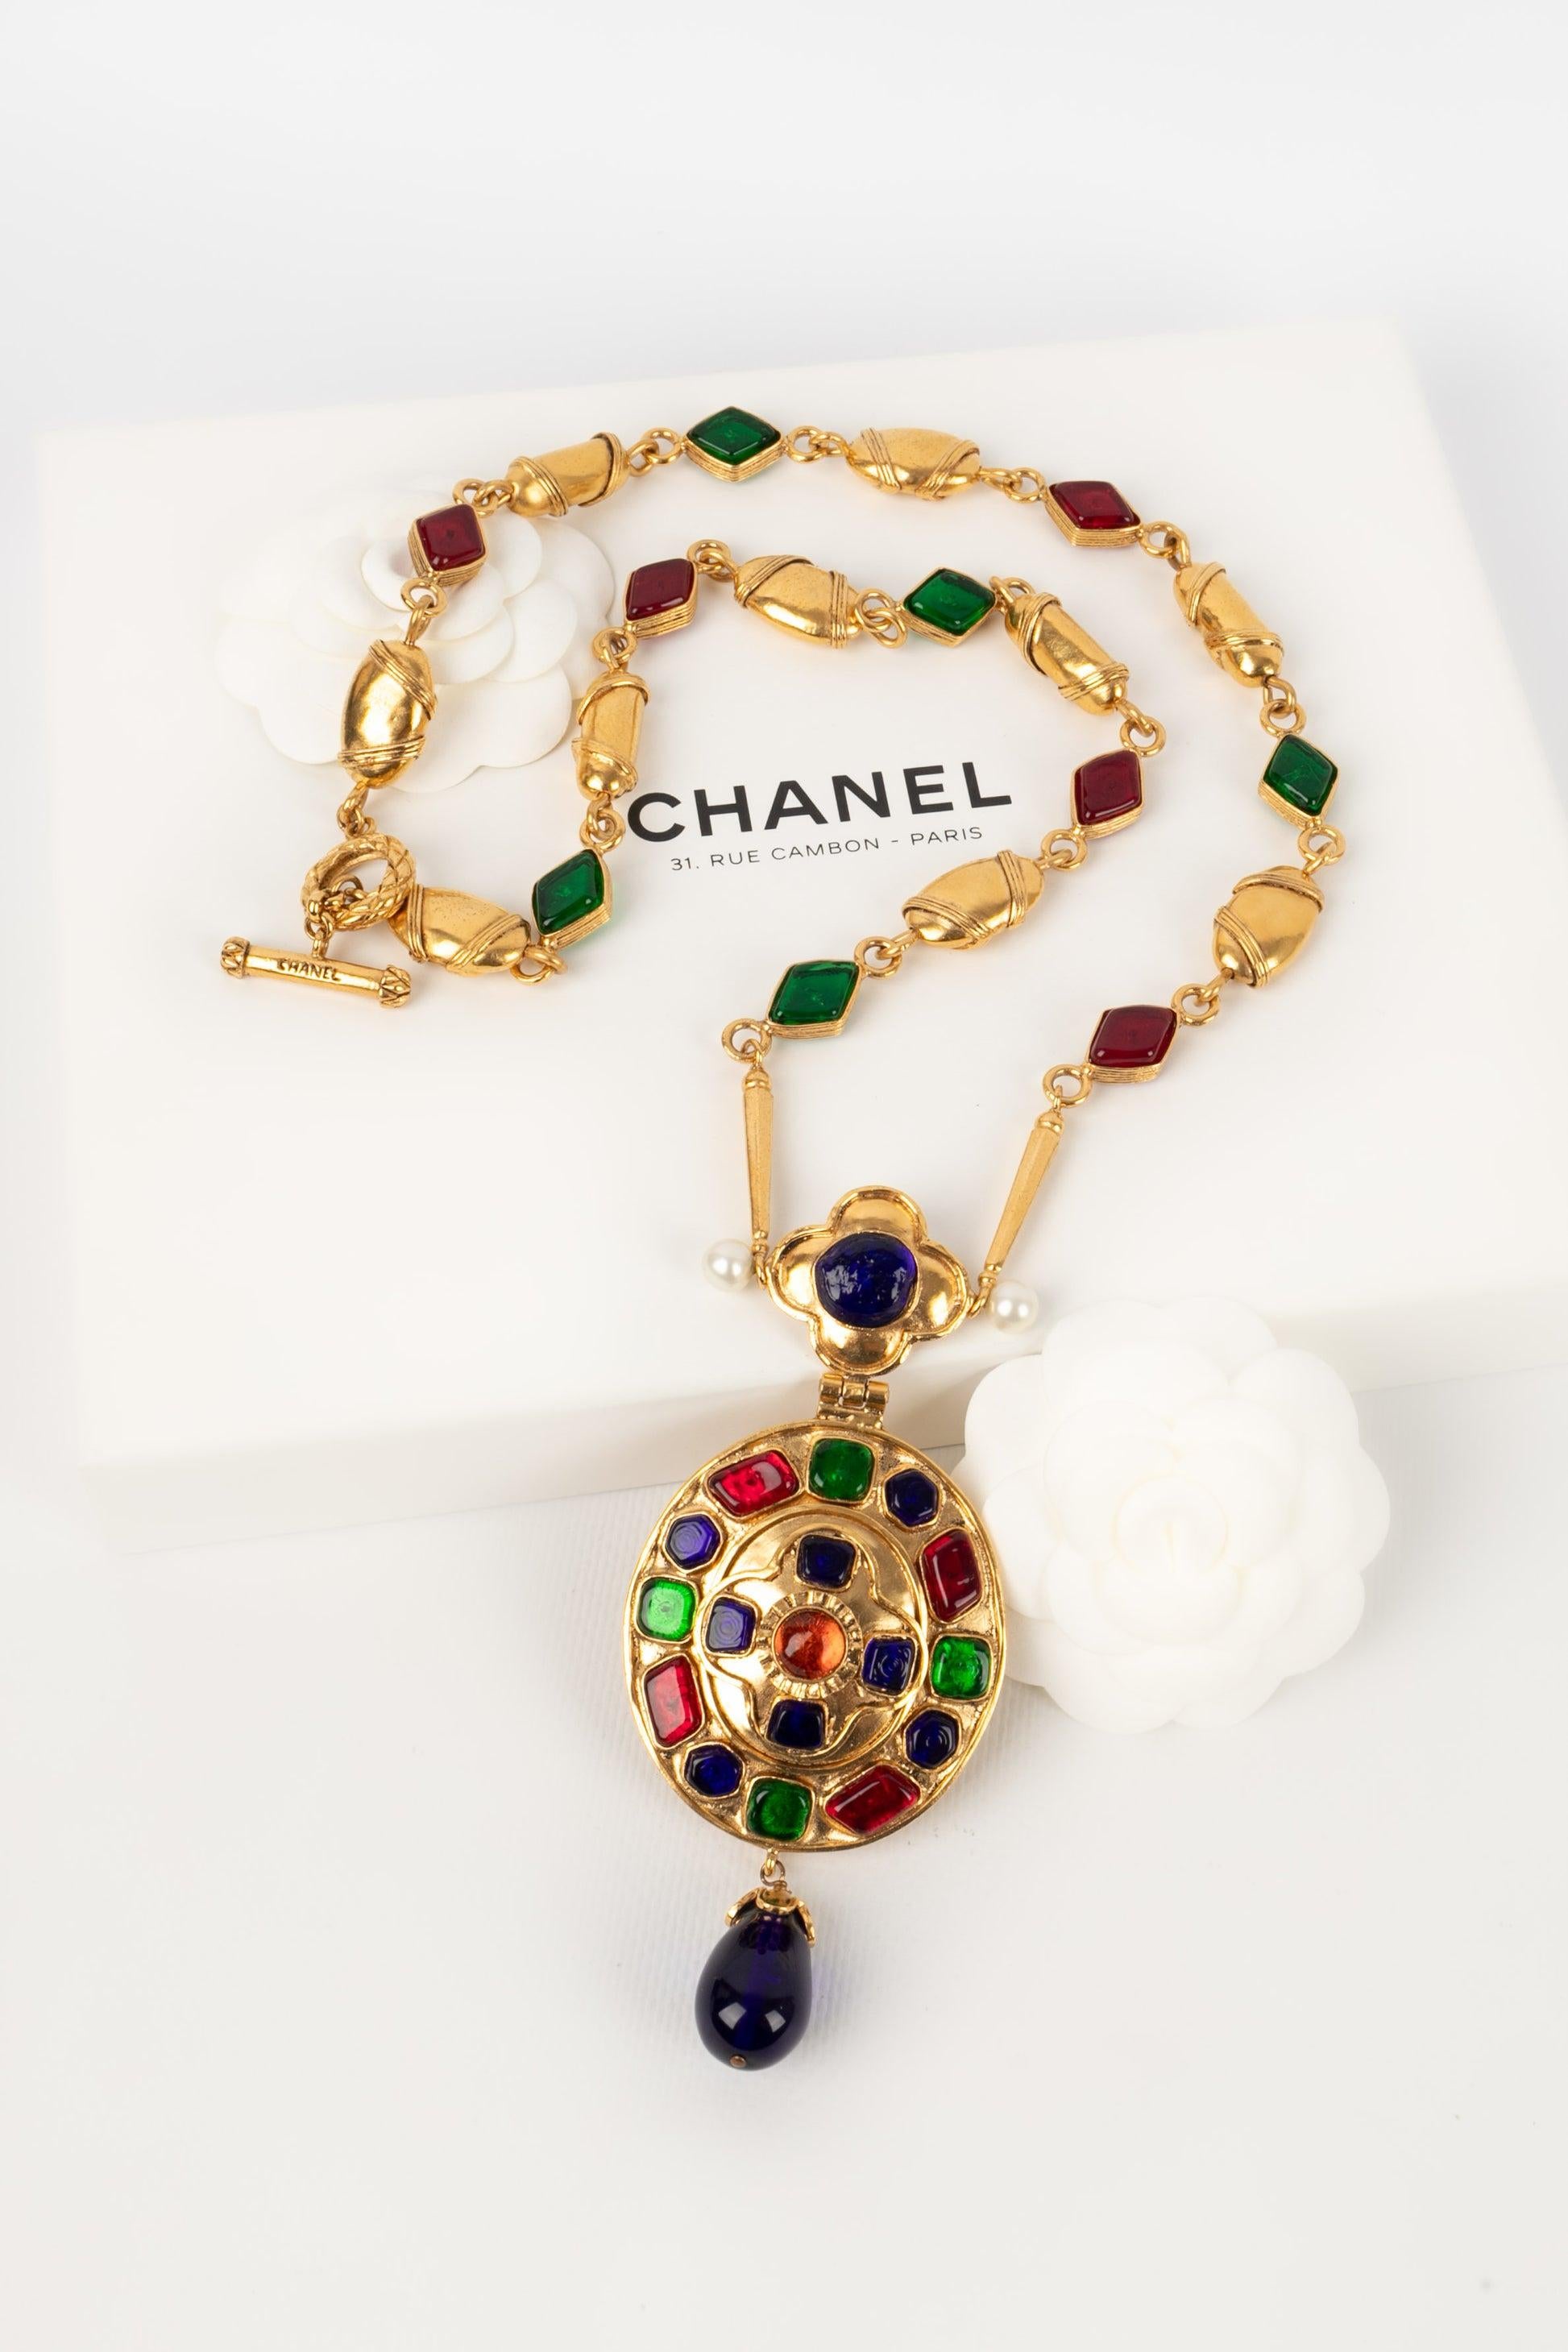 Chanel - (Made in France) Golden metal necklace with glass paste cabochons. Fall-Winter 1994 Collection.

Additional information:
Condition: Very good condition
Dimensions: Length: 75 cm

Seller Reference: CB224
